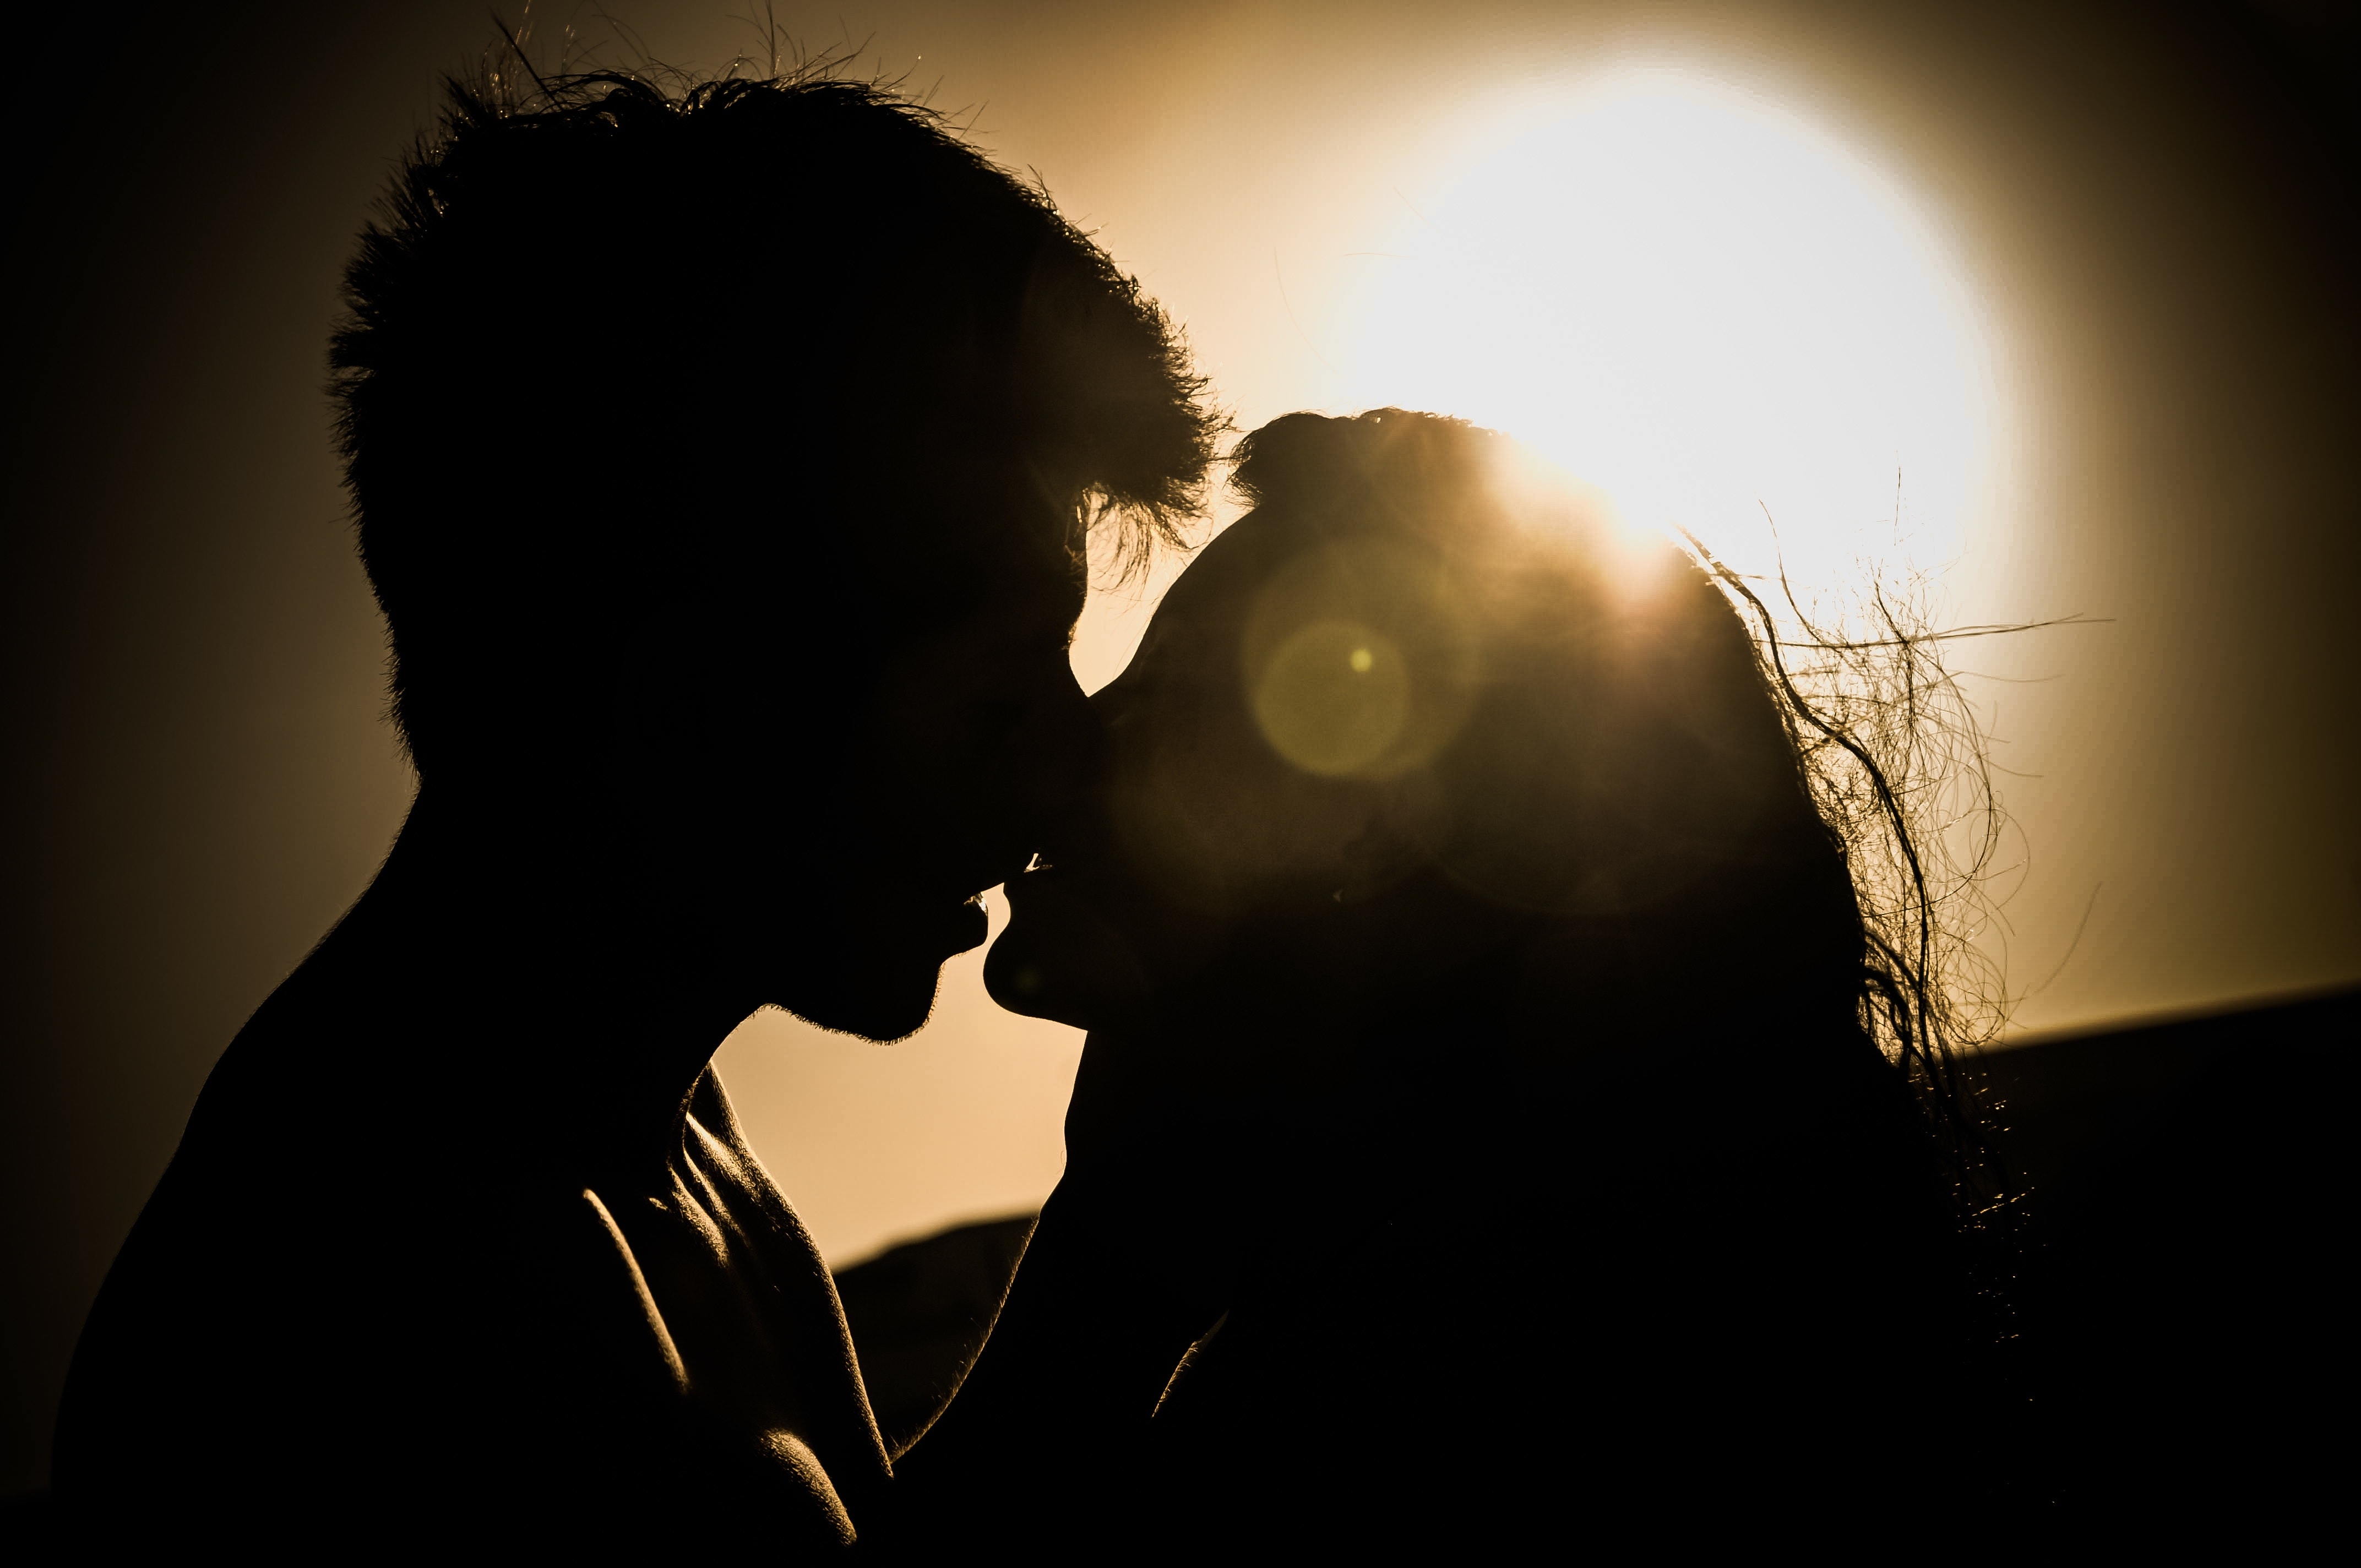 Silhouettes of Couple Kissing Against Sunset, Affection, Lovers, Sunset, Sunrise, HQ Photo